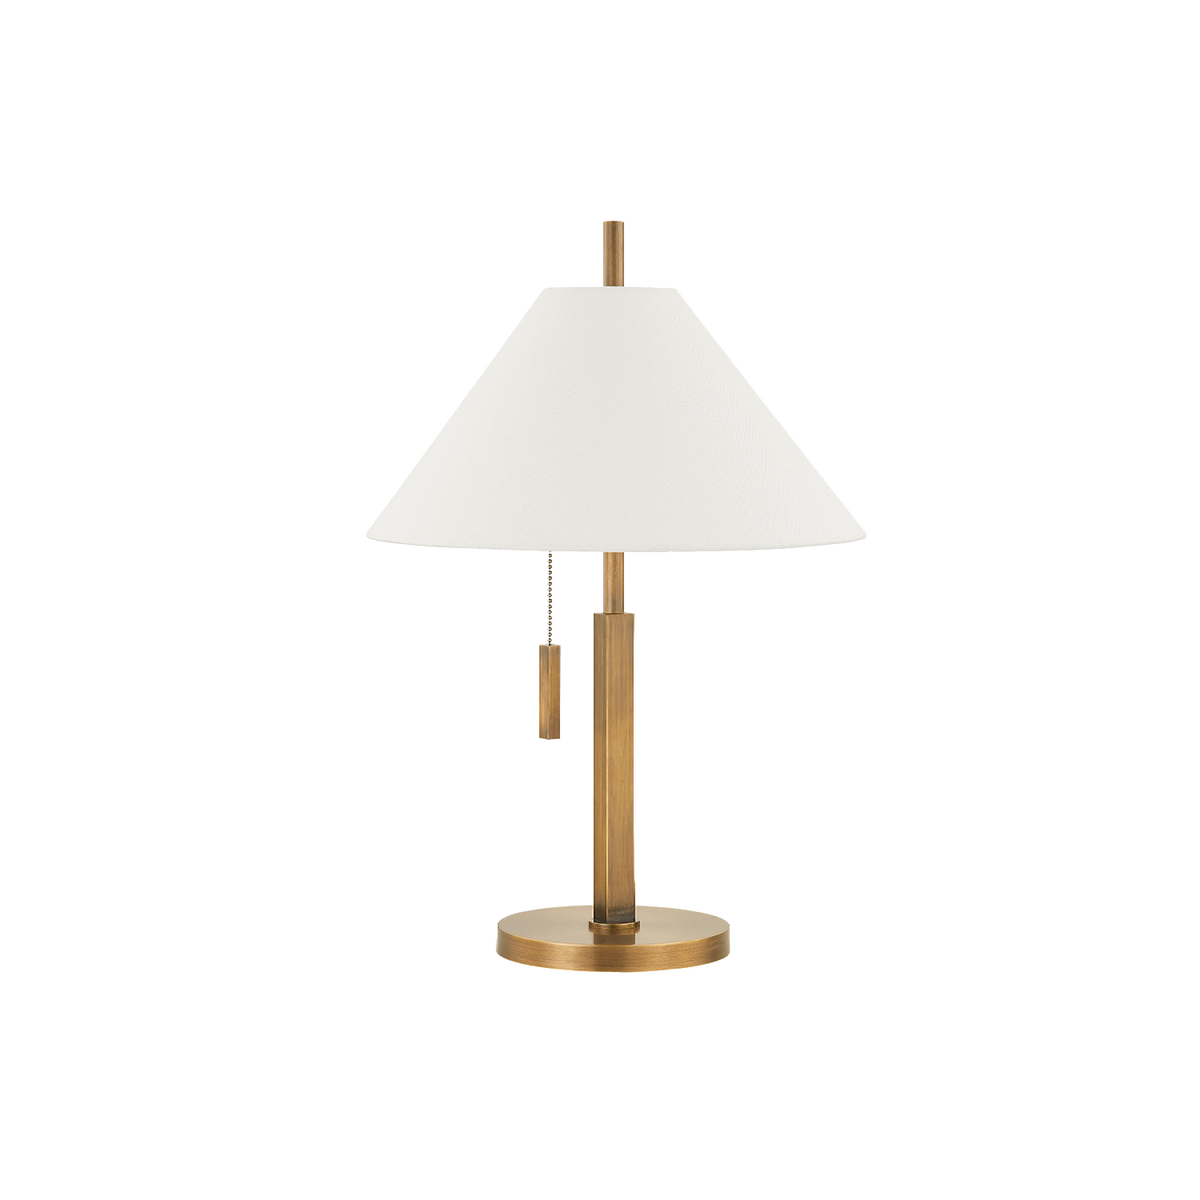 The Clic Table Lamp is classic and tailored.